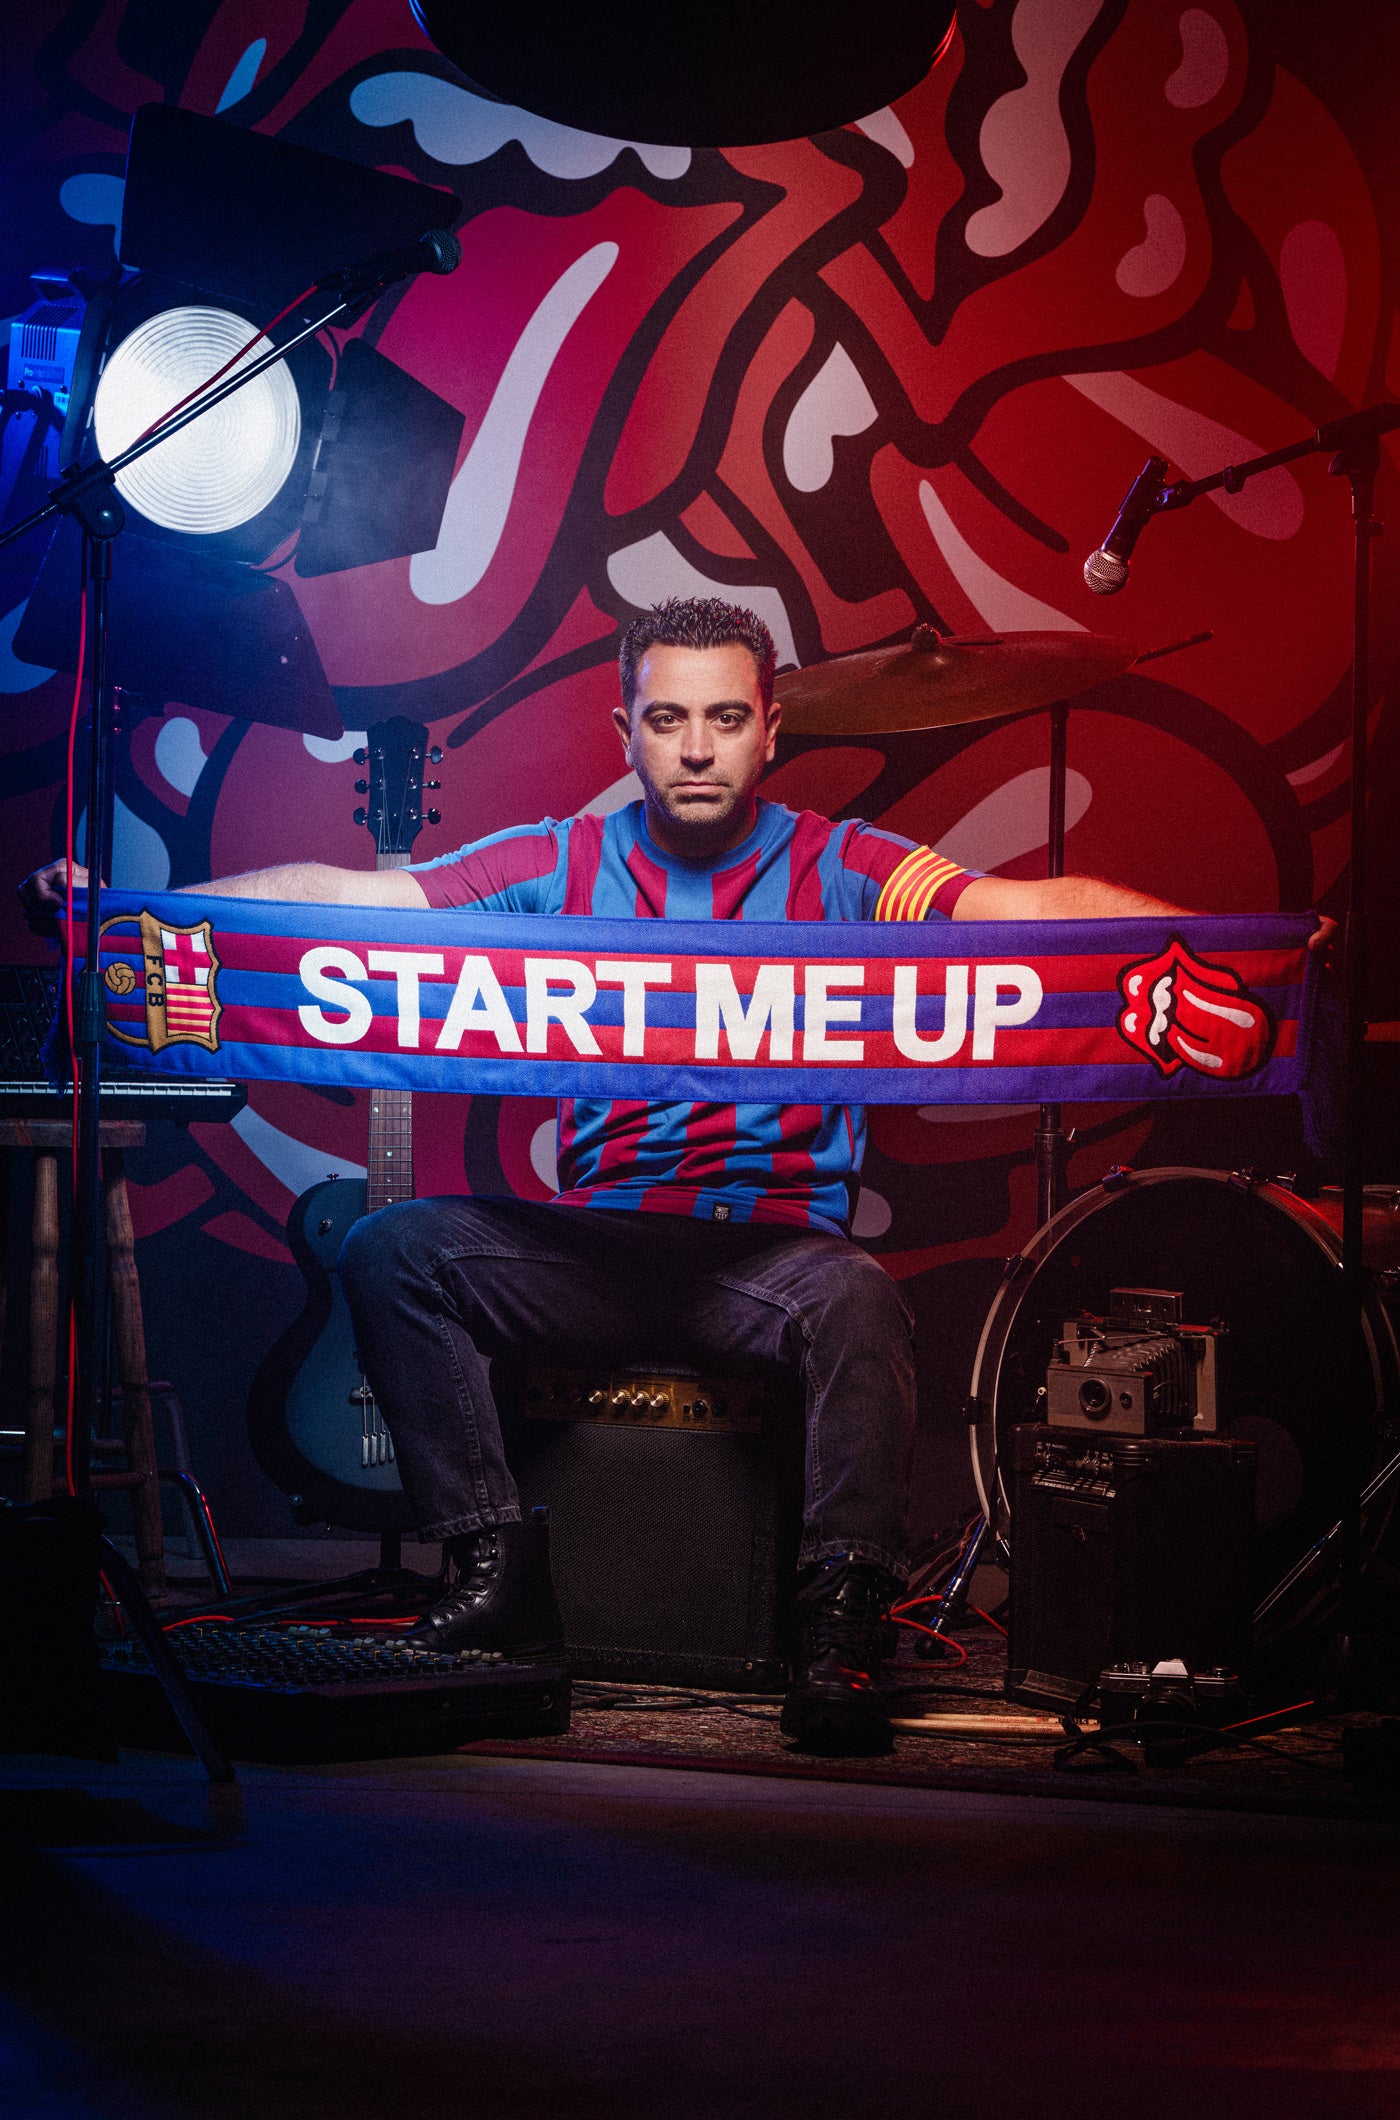 Barça x Rolling Stones limited edition scarf